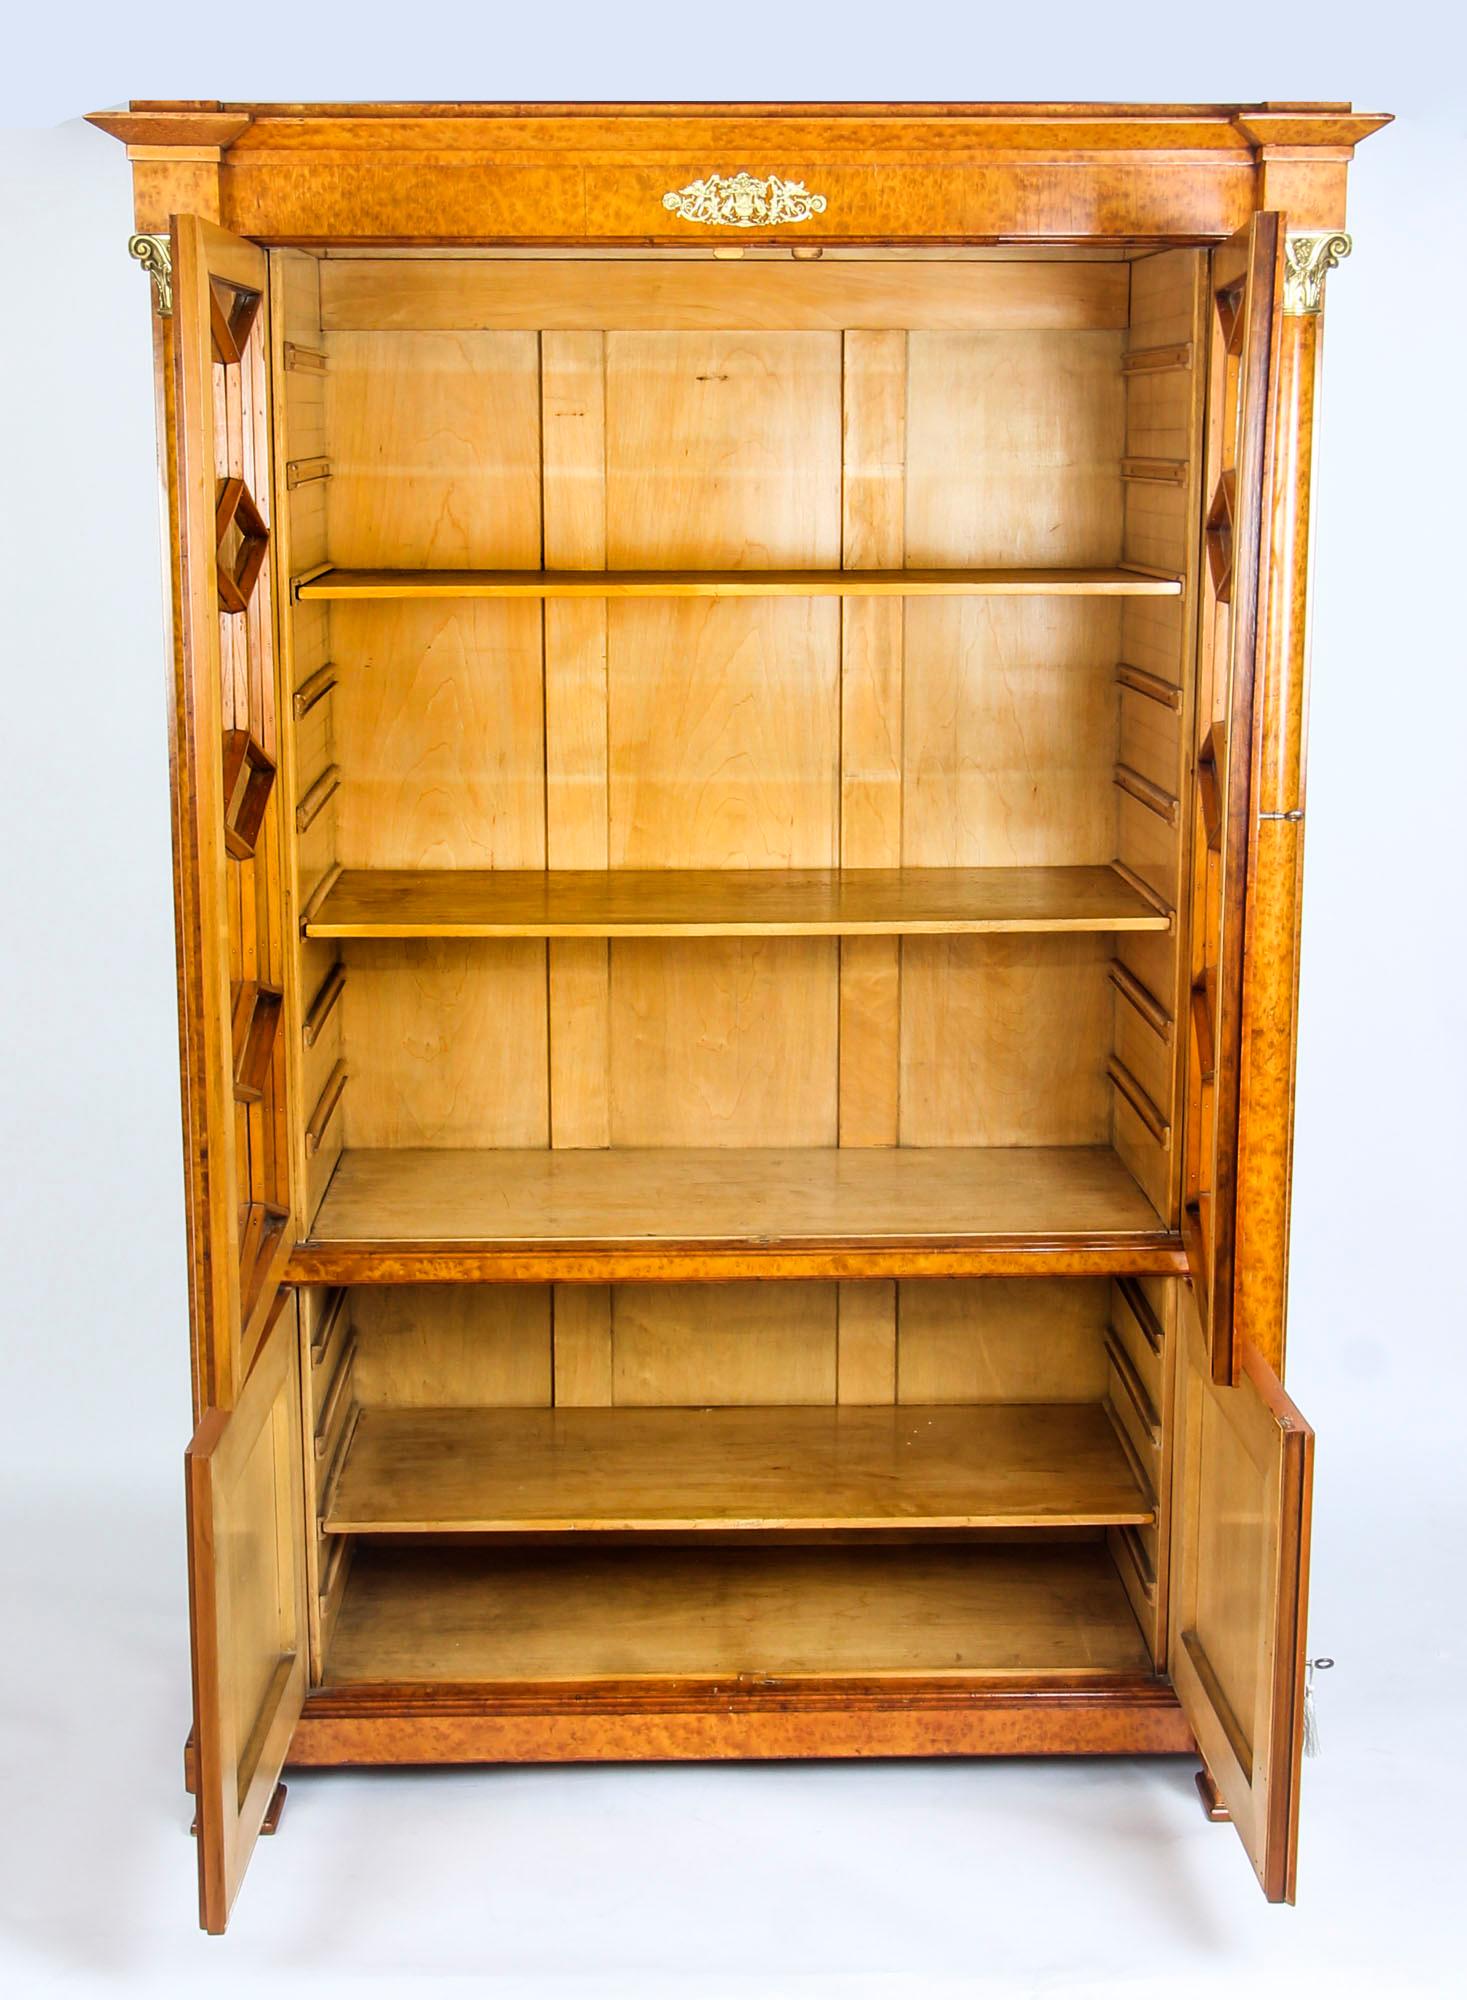 Antique French Charles X Burr Maple and Ormolu Bookcase, 19th Century For Sale 7